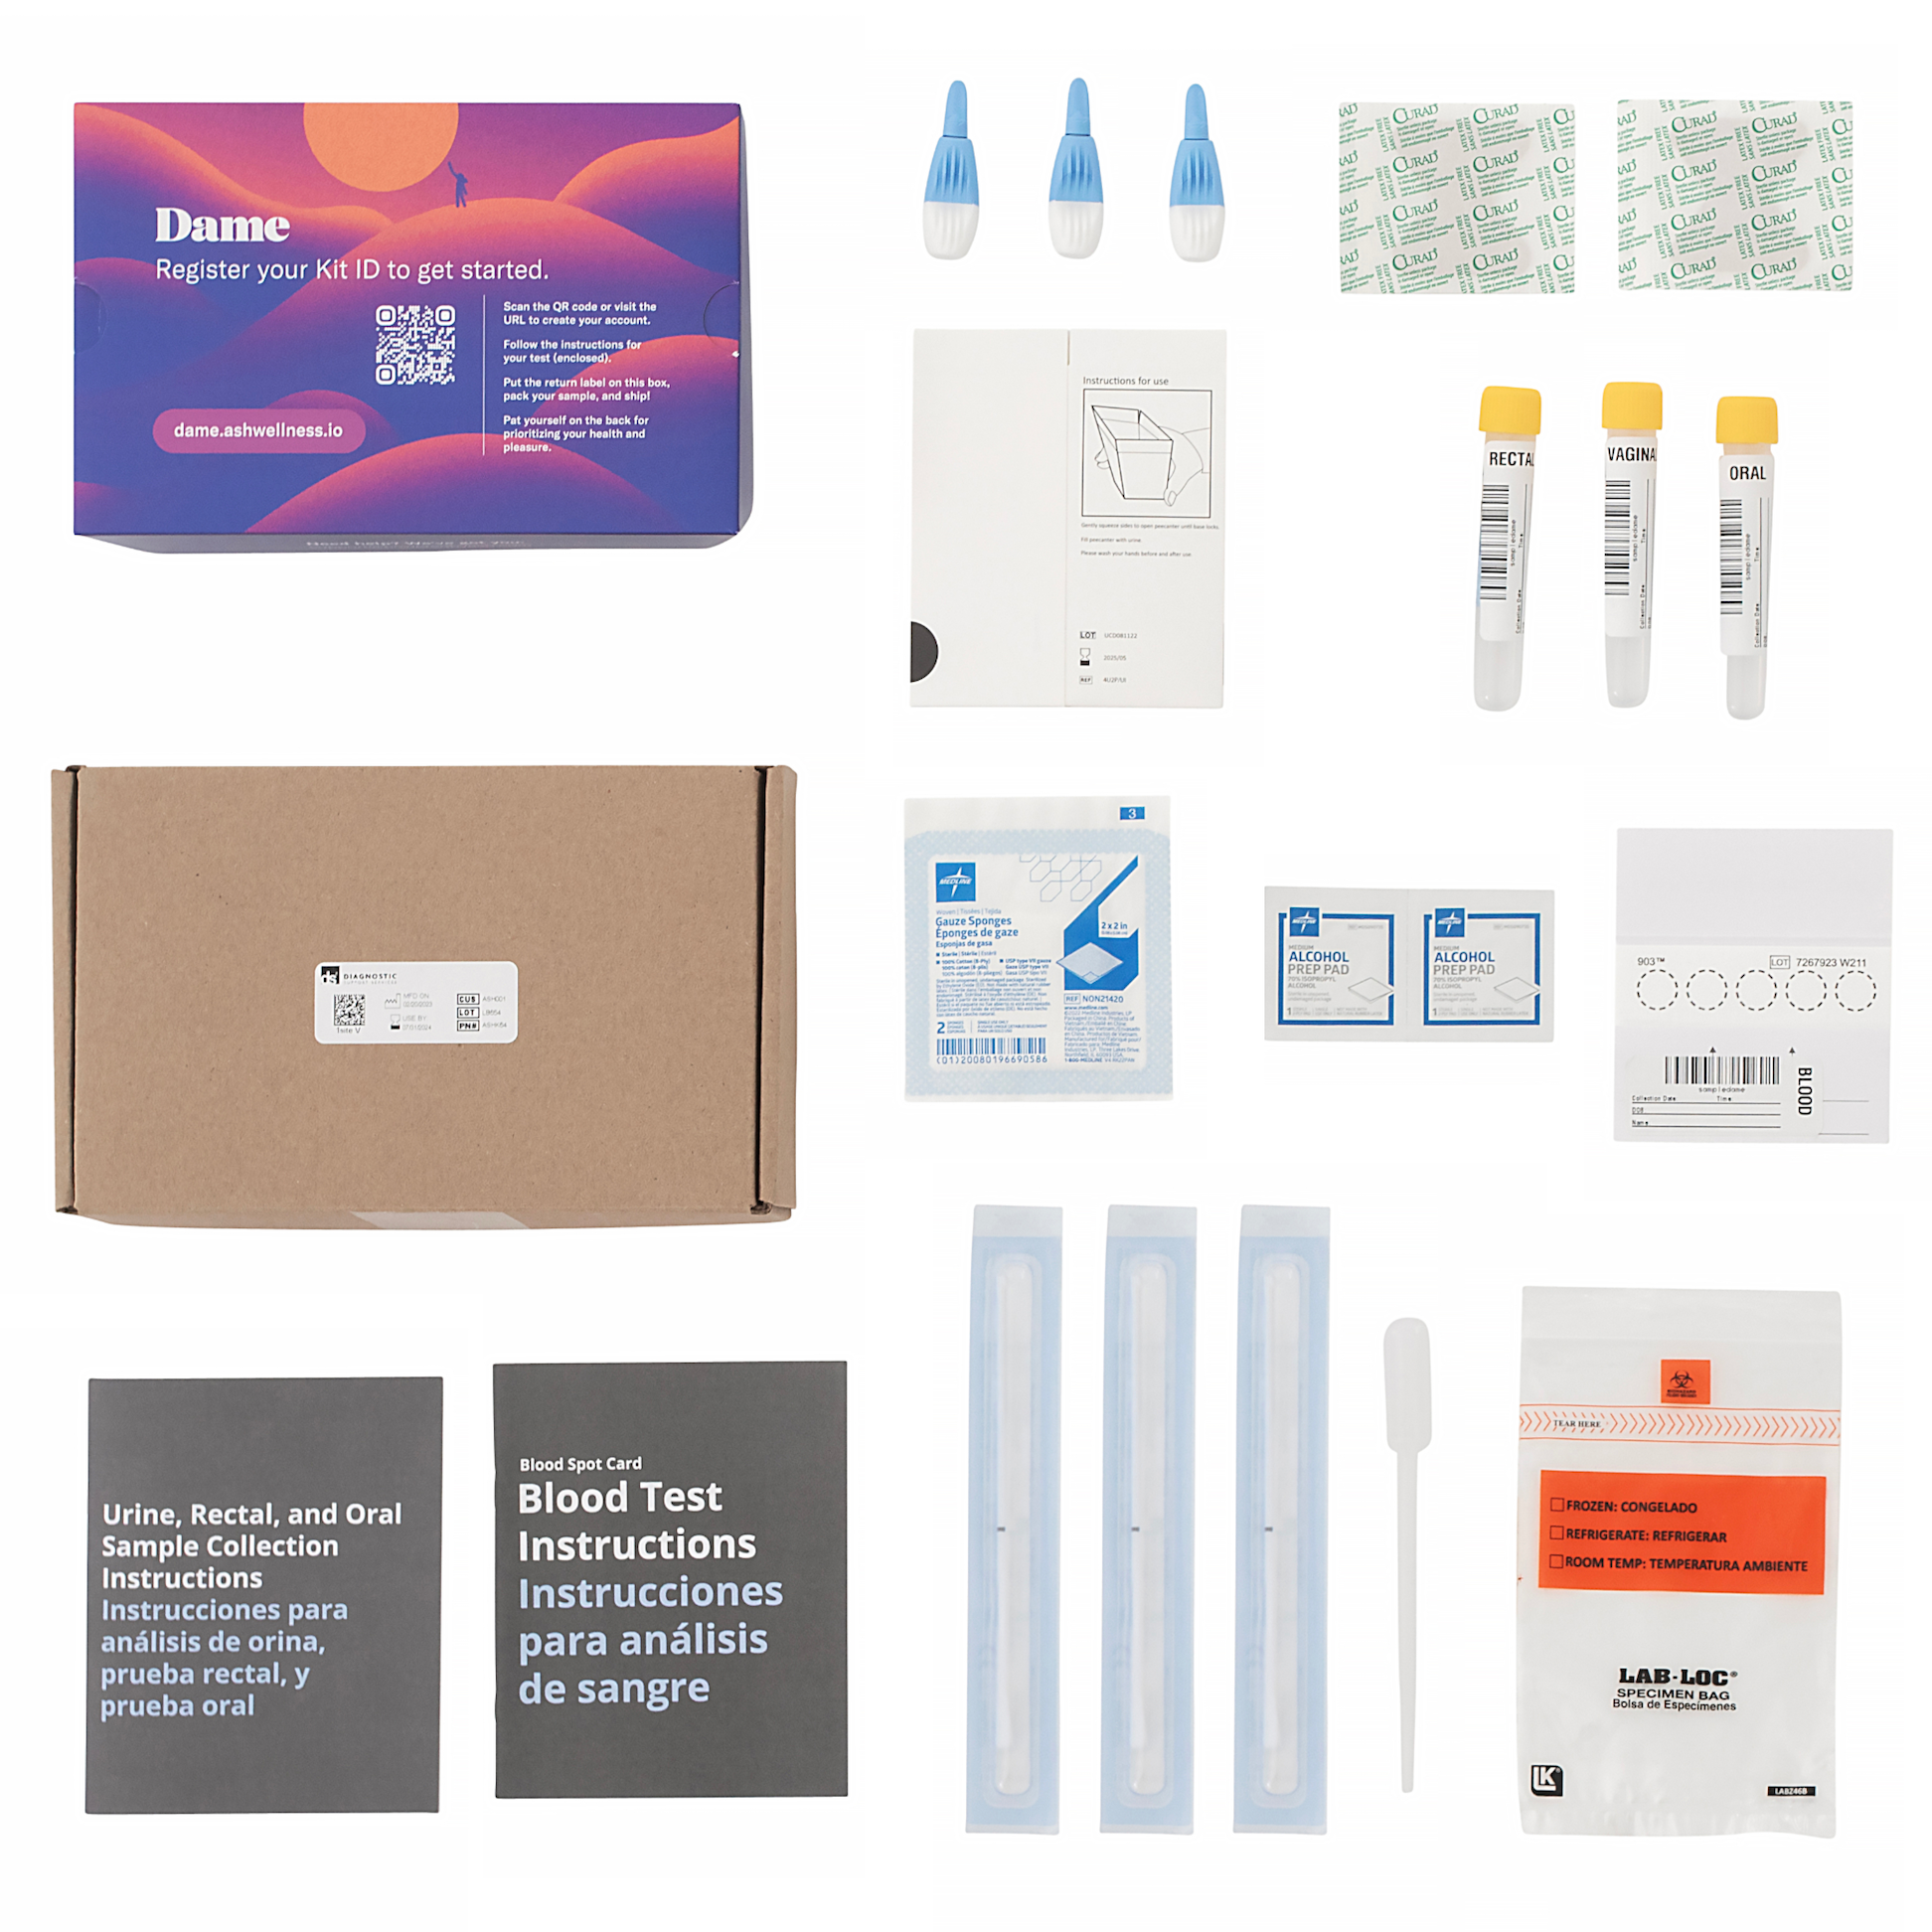 Urine-Rectal-Anal-Swab-Collection | Seamless | 3 site test kit for penis-havers